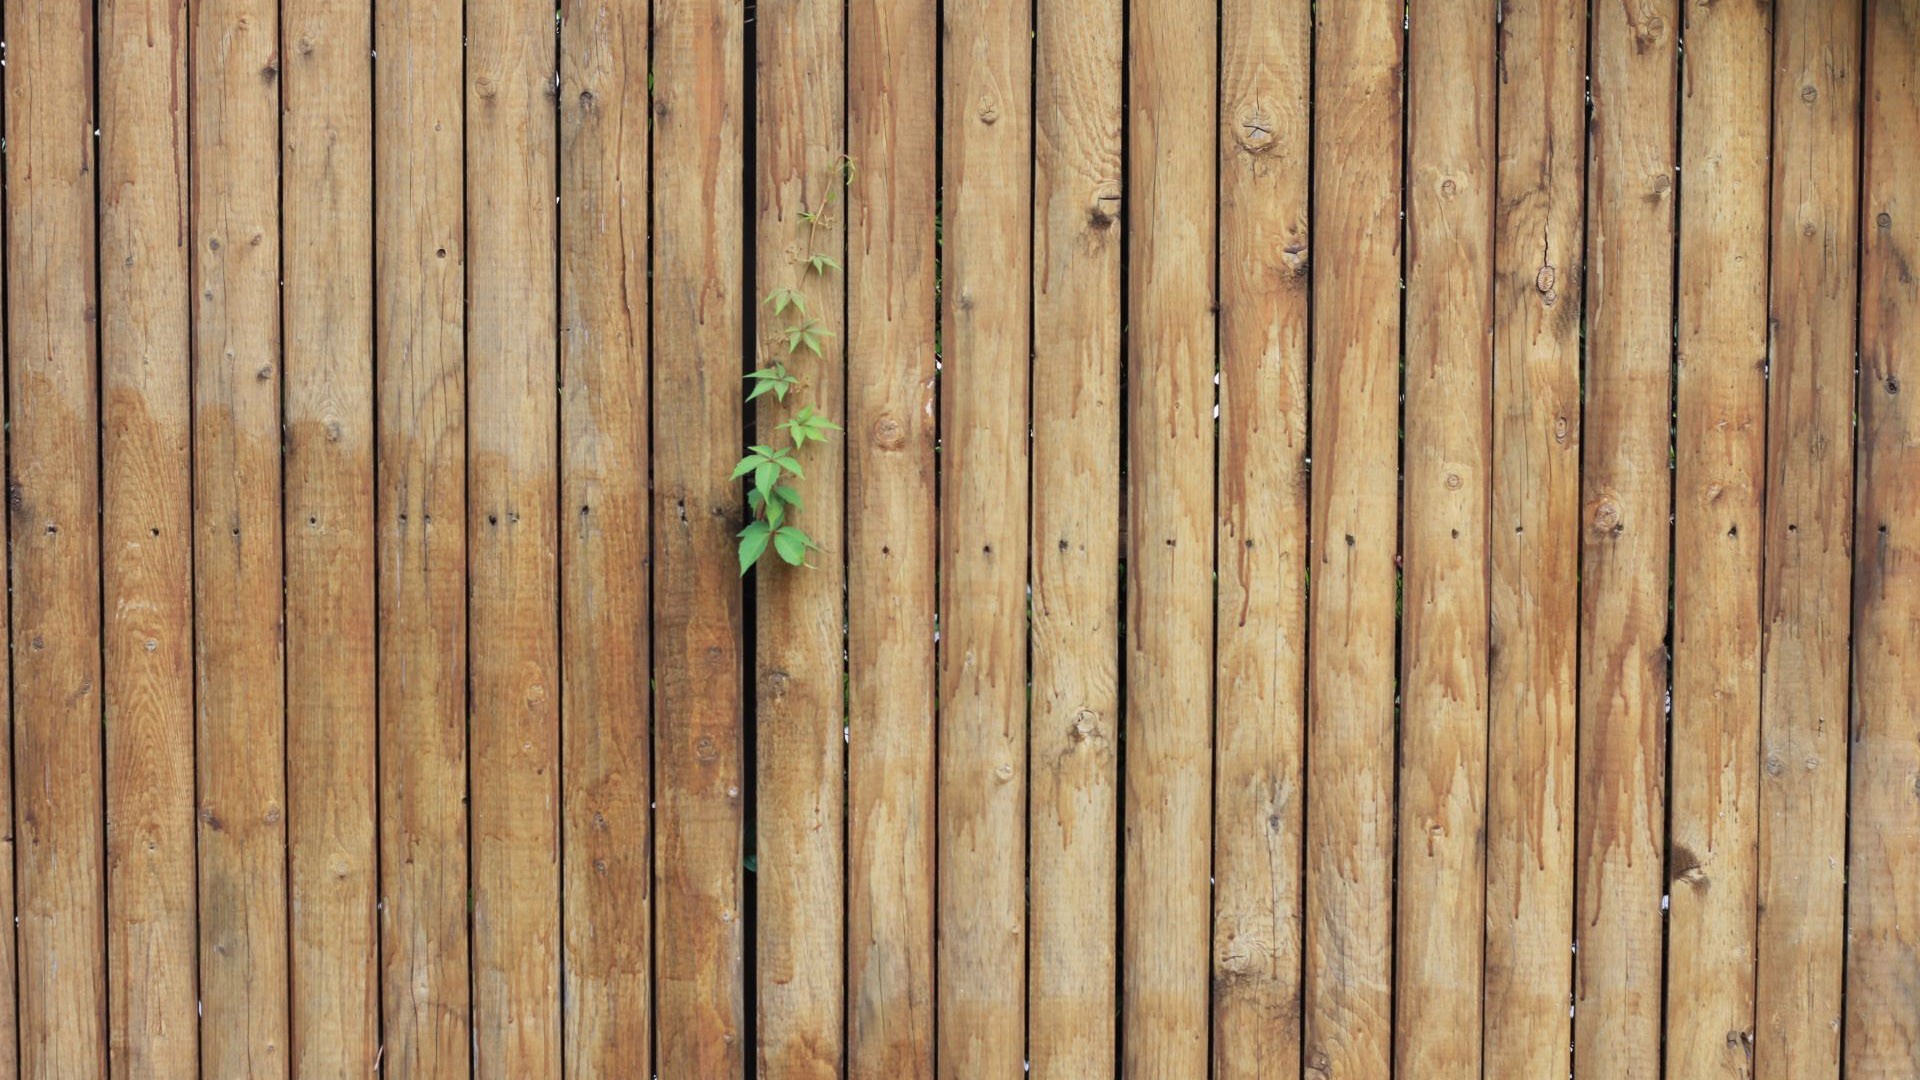 General 1920x1080 leaves wooden surface spring wood plants